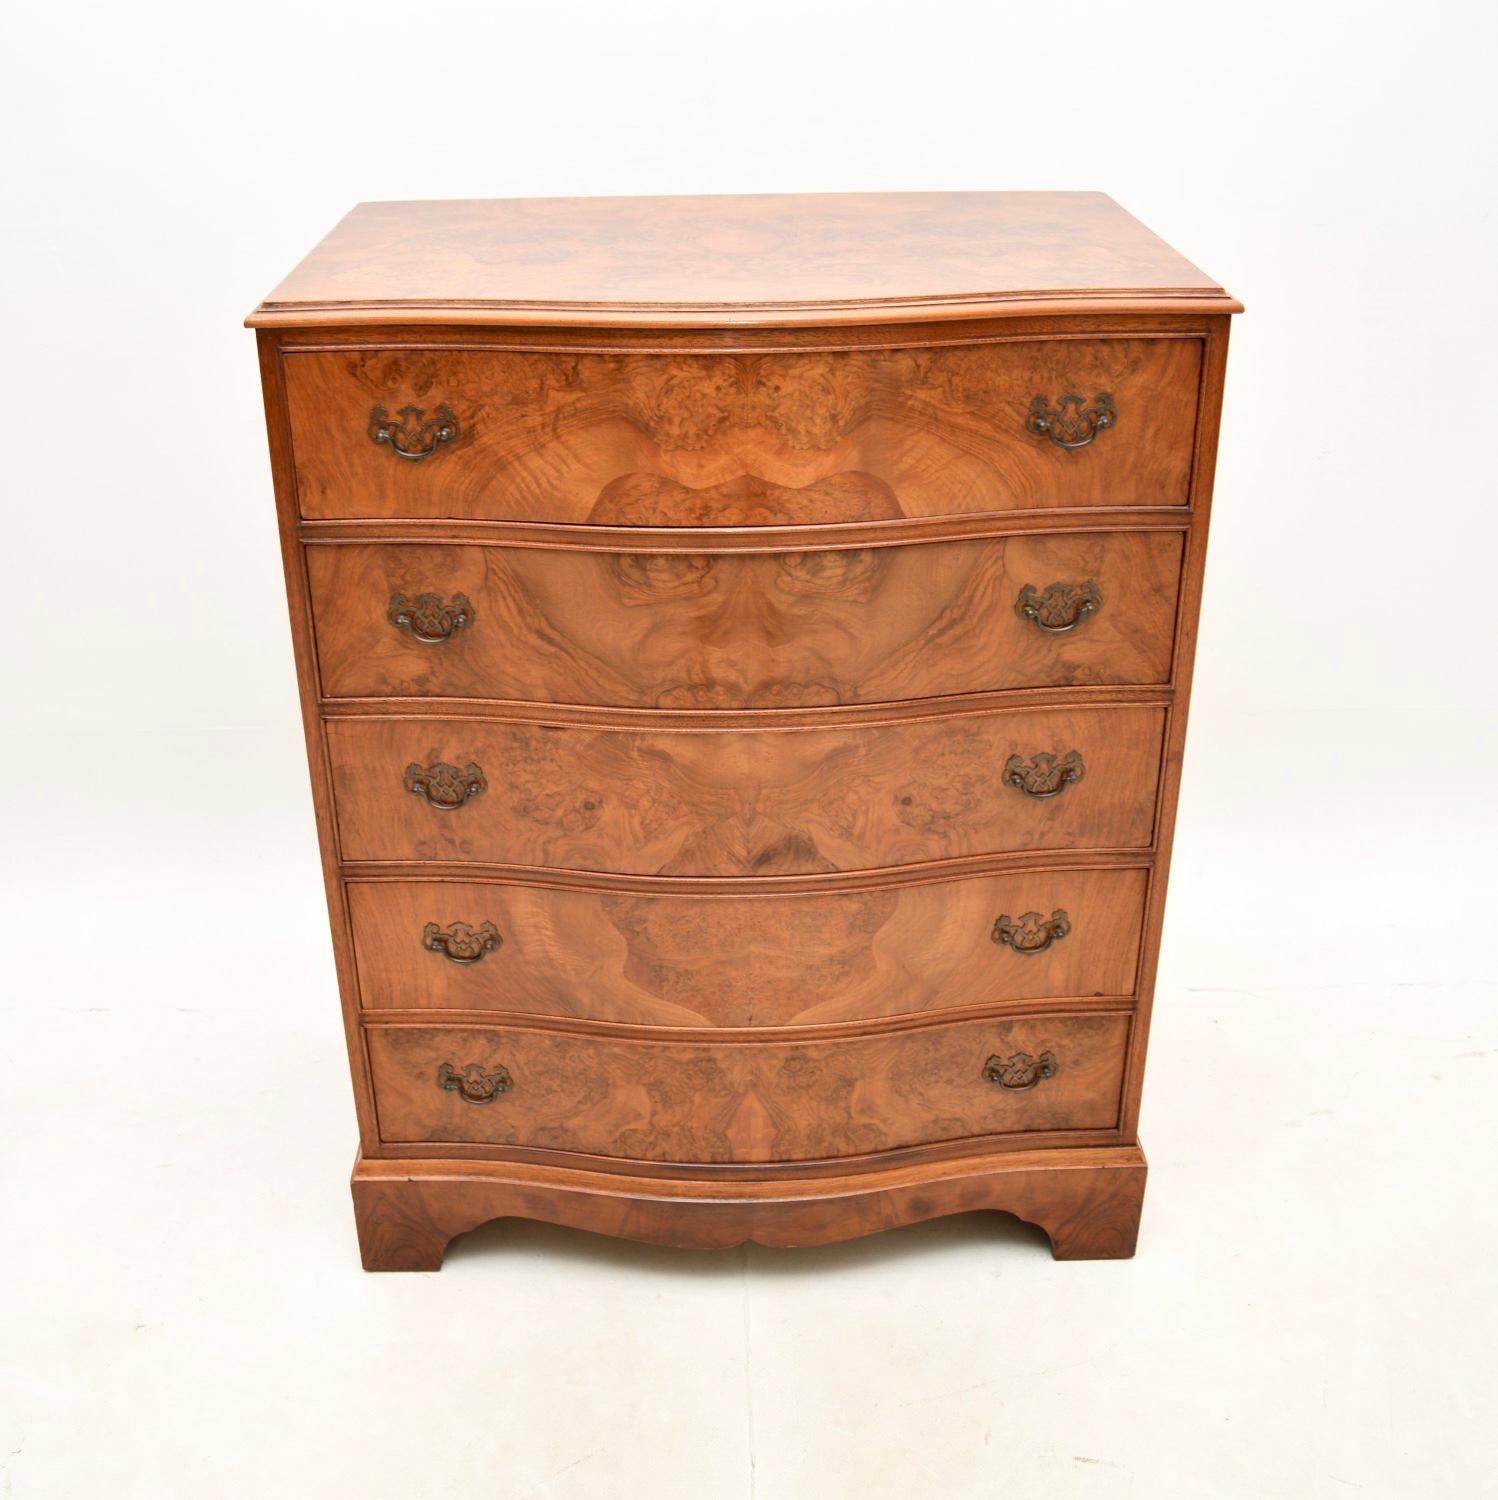 A beautiful and practical antique Georgian style walnut chest of drawers. This was made in England, it dates from around the 1930’s.

The quality is superb, this is a very useful size with lots of storage space inside the five generous drawers. This